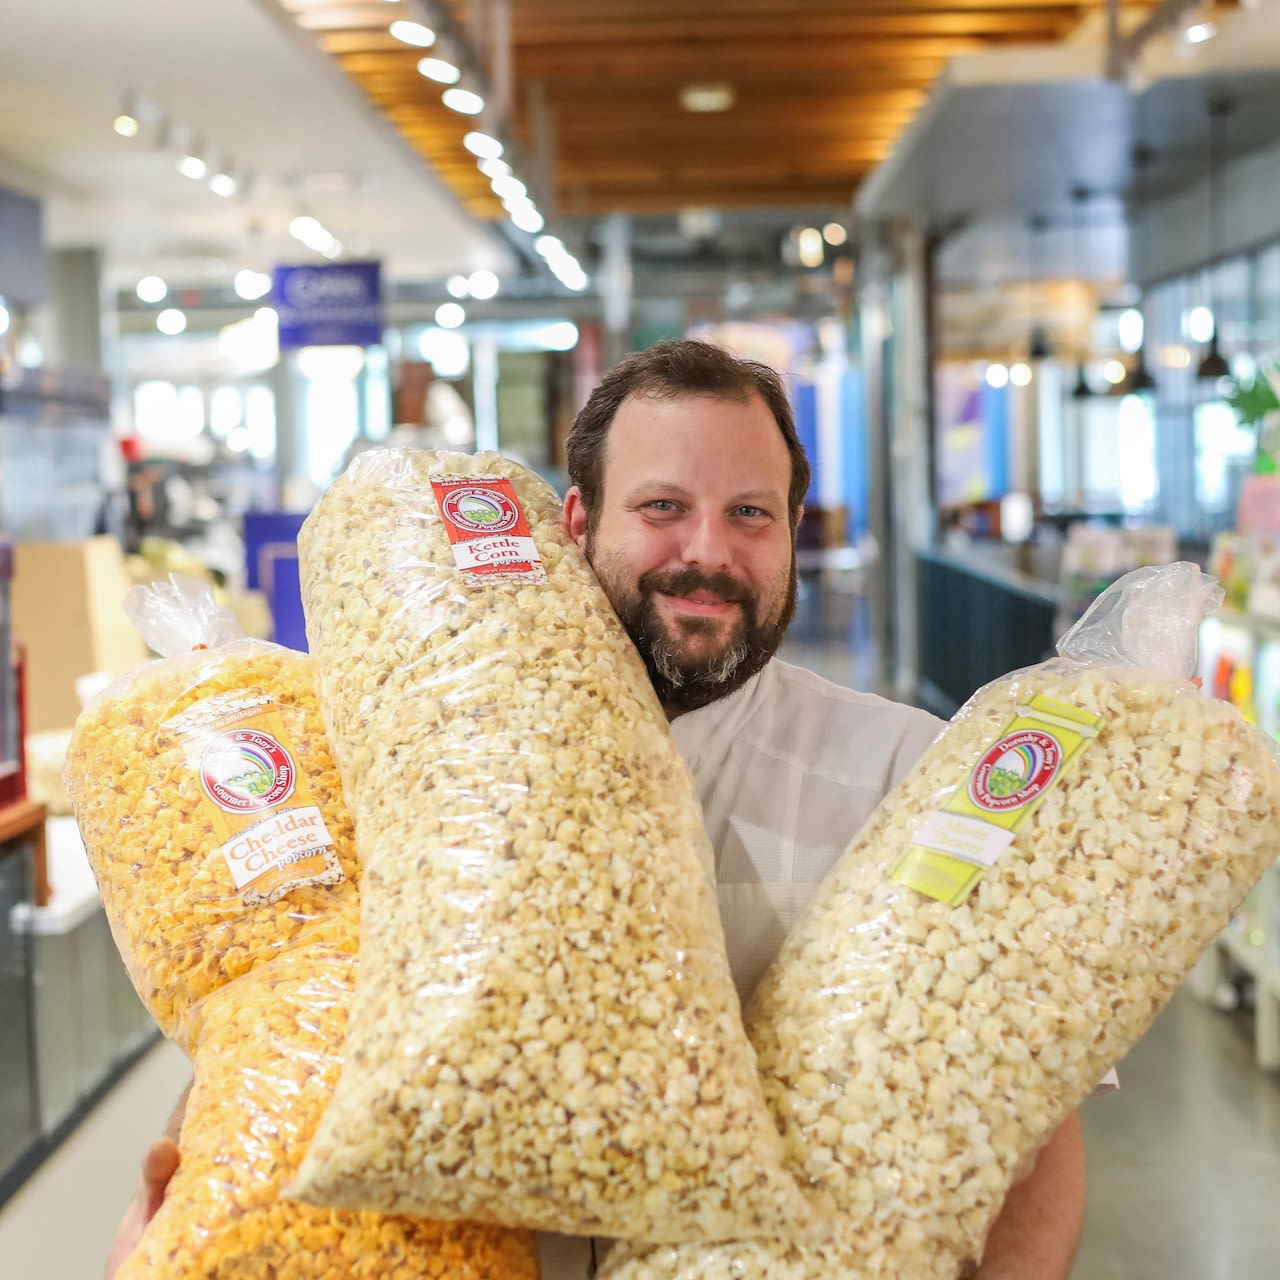 Gourmet popcorn shop reopens with new sweet, savory flavors in Grand Rapids